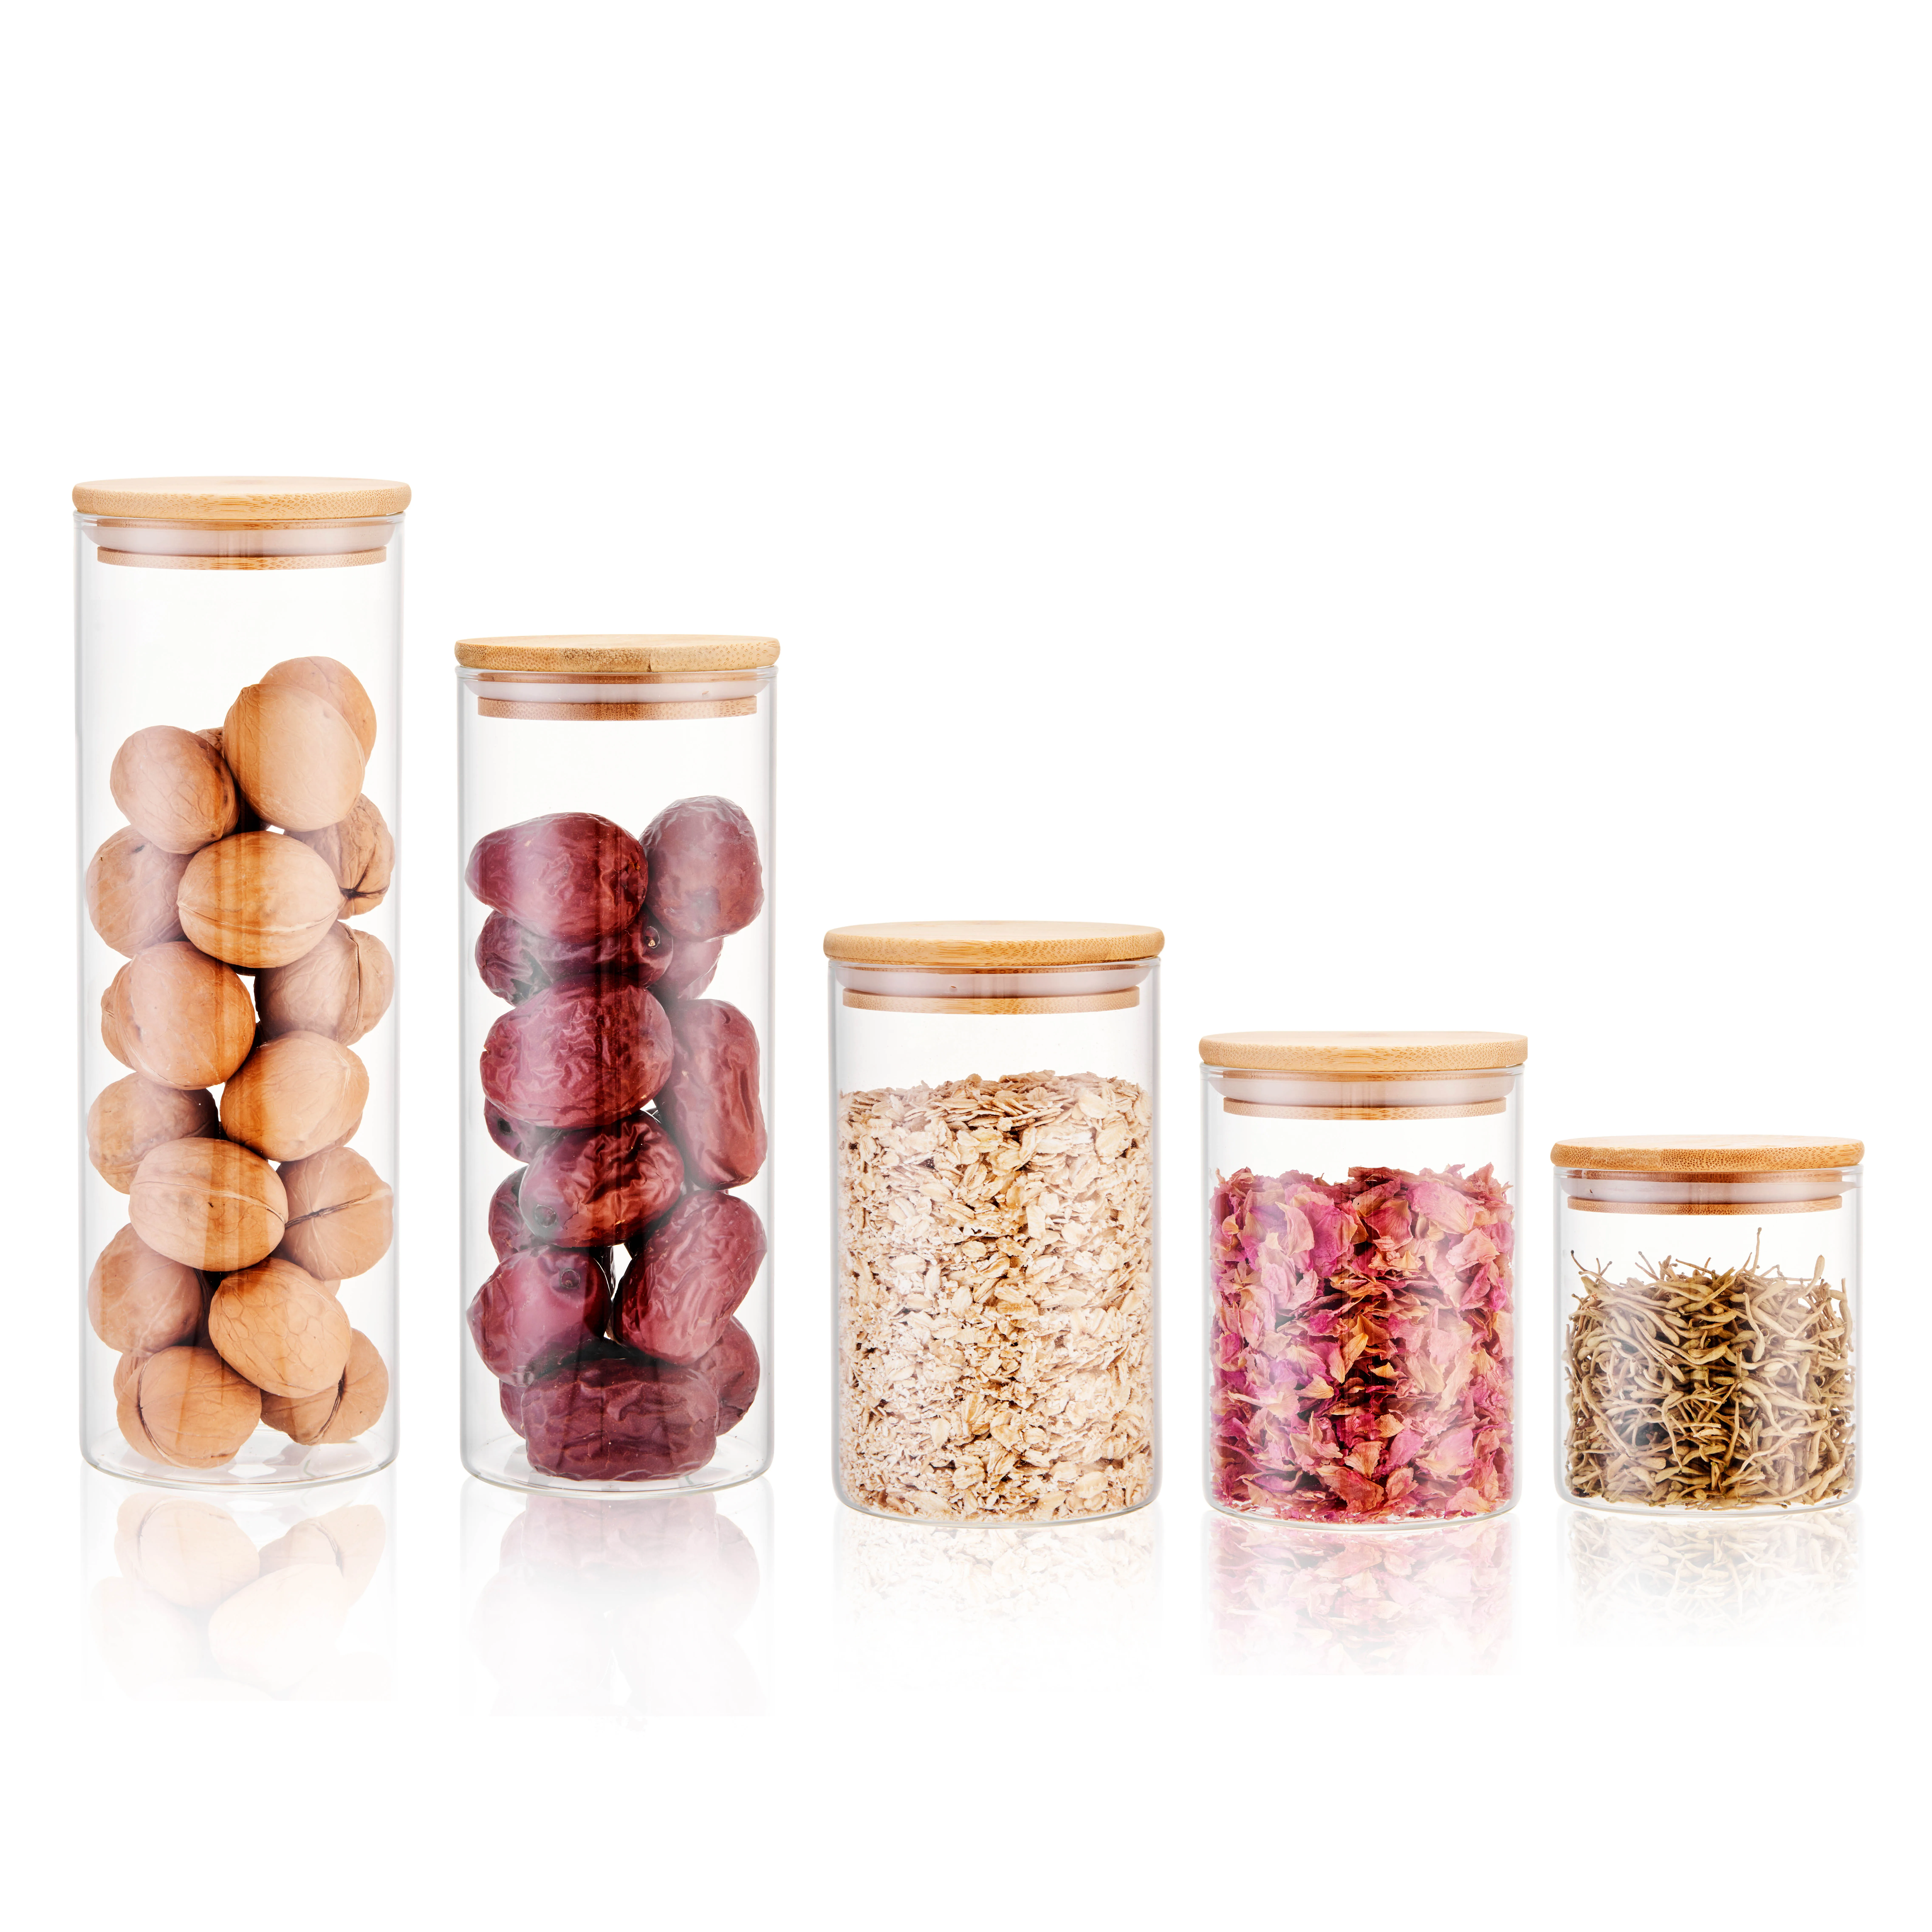 LINUO Eco Friendly Glass Food Storage Jar Glass Jar With Bamboo Lid For Food ,Coffee, Candy glass jar whole sales supplier (1600471895793)